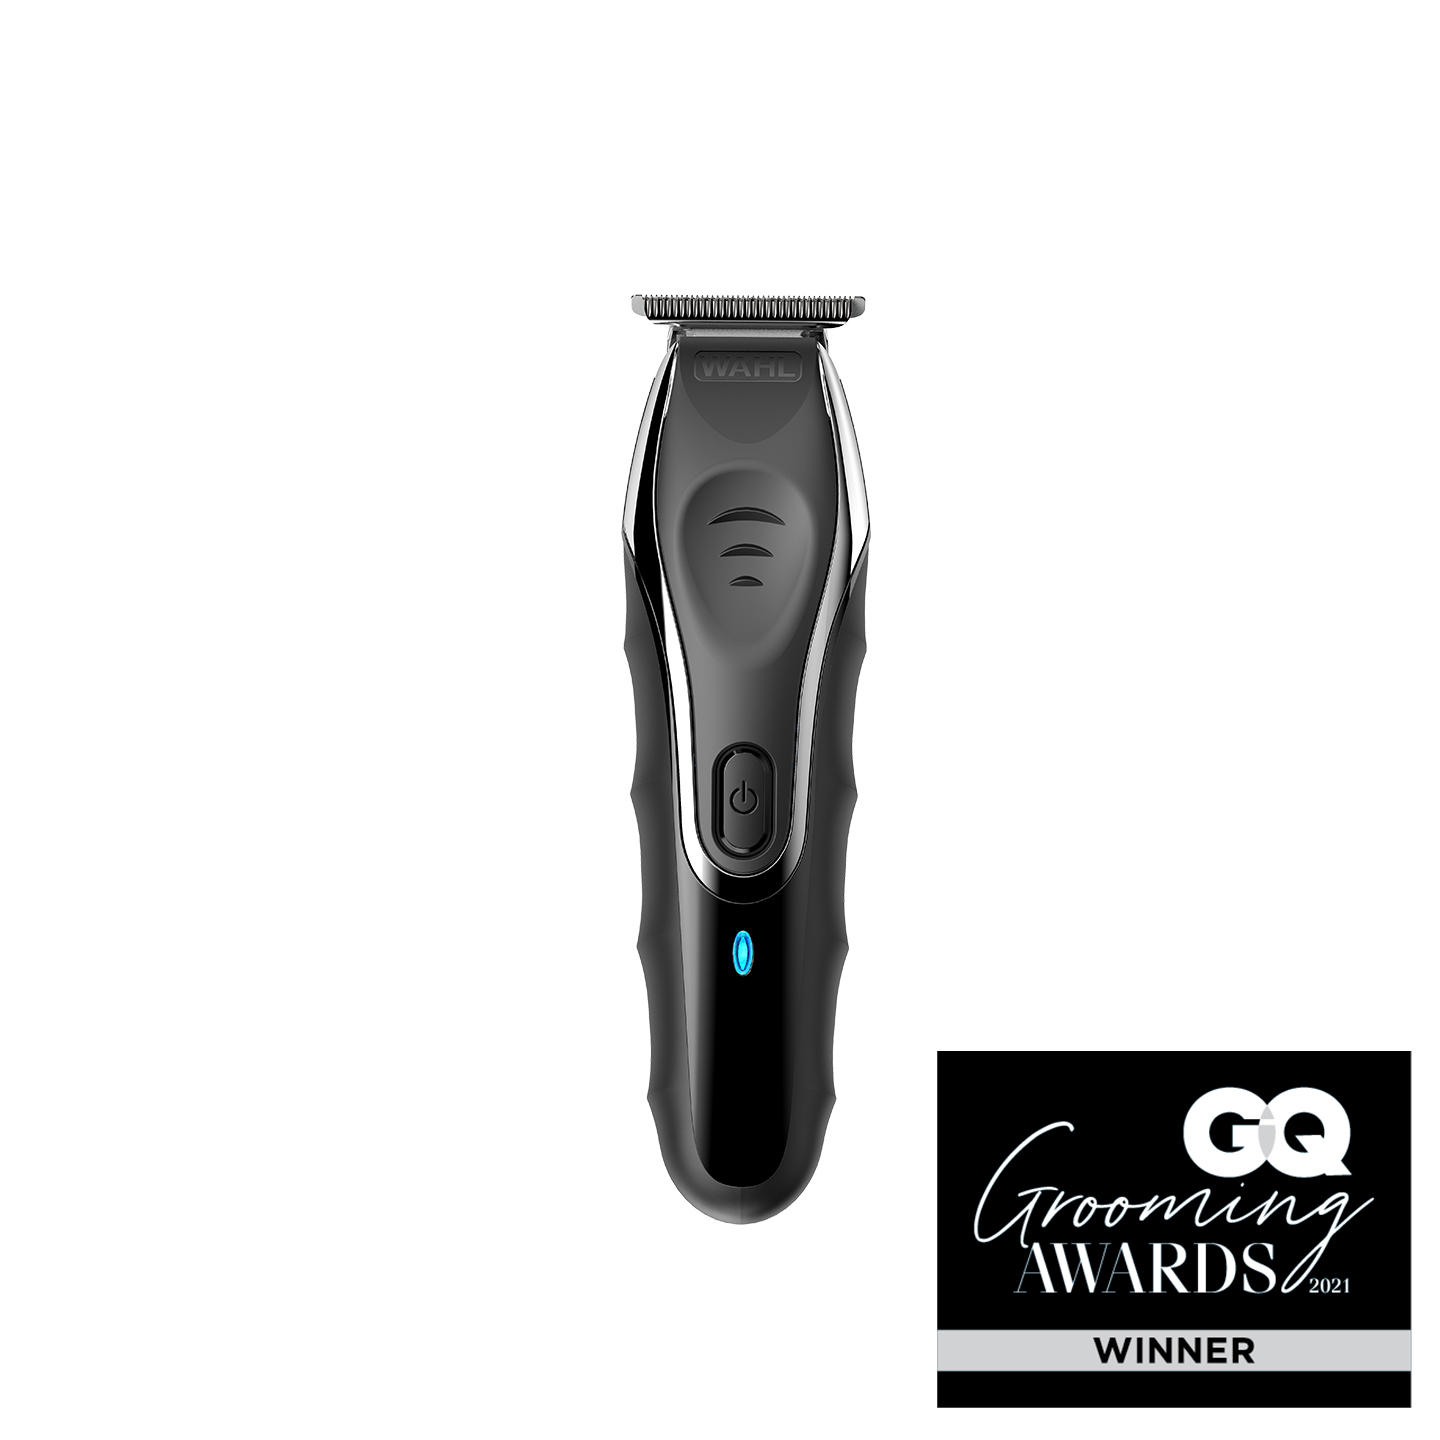 wahl edge trimmer